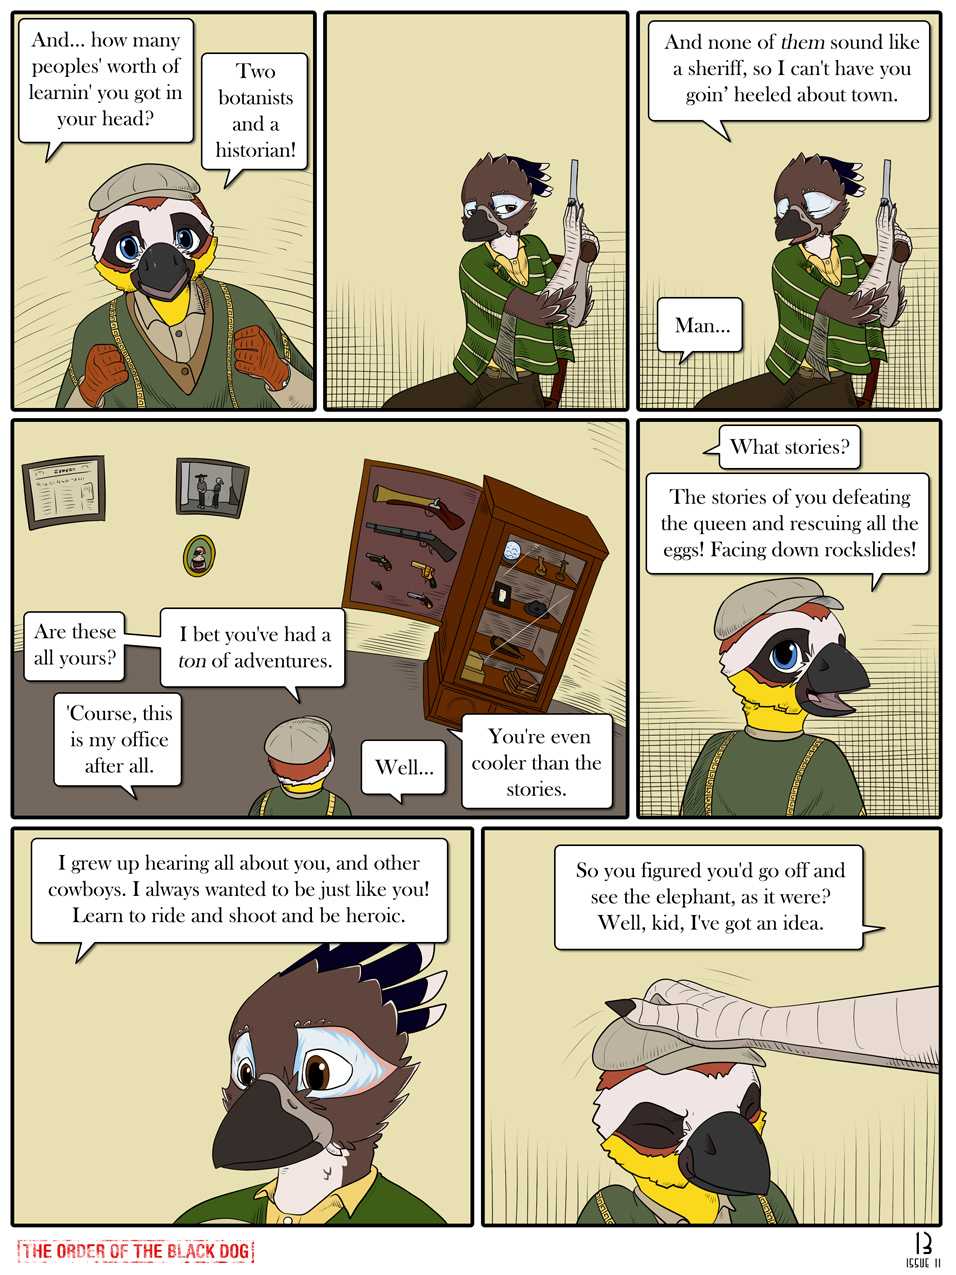 Issue 11, Page 13